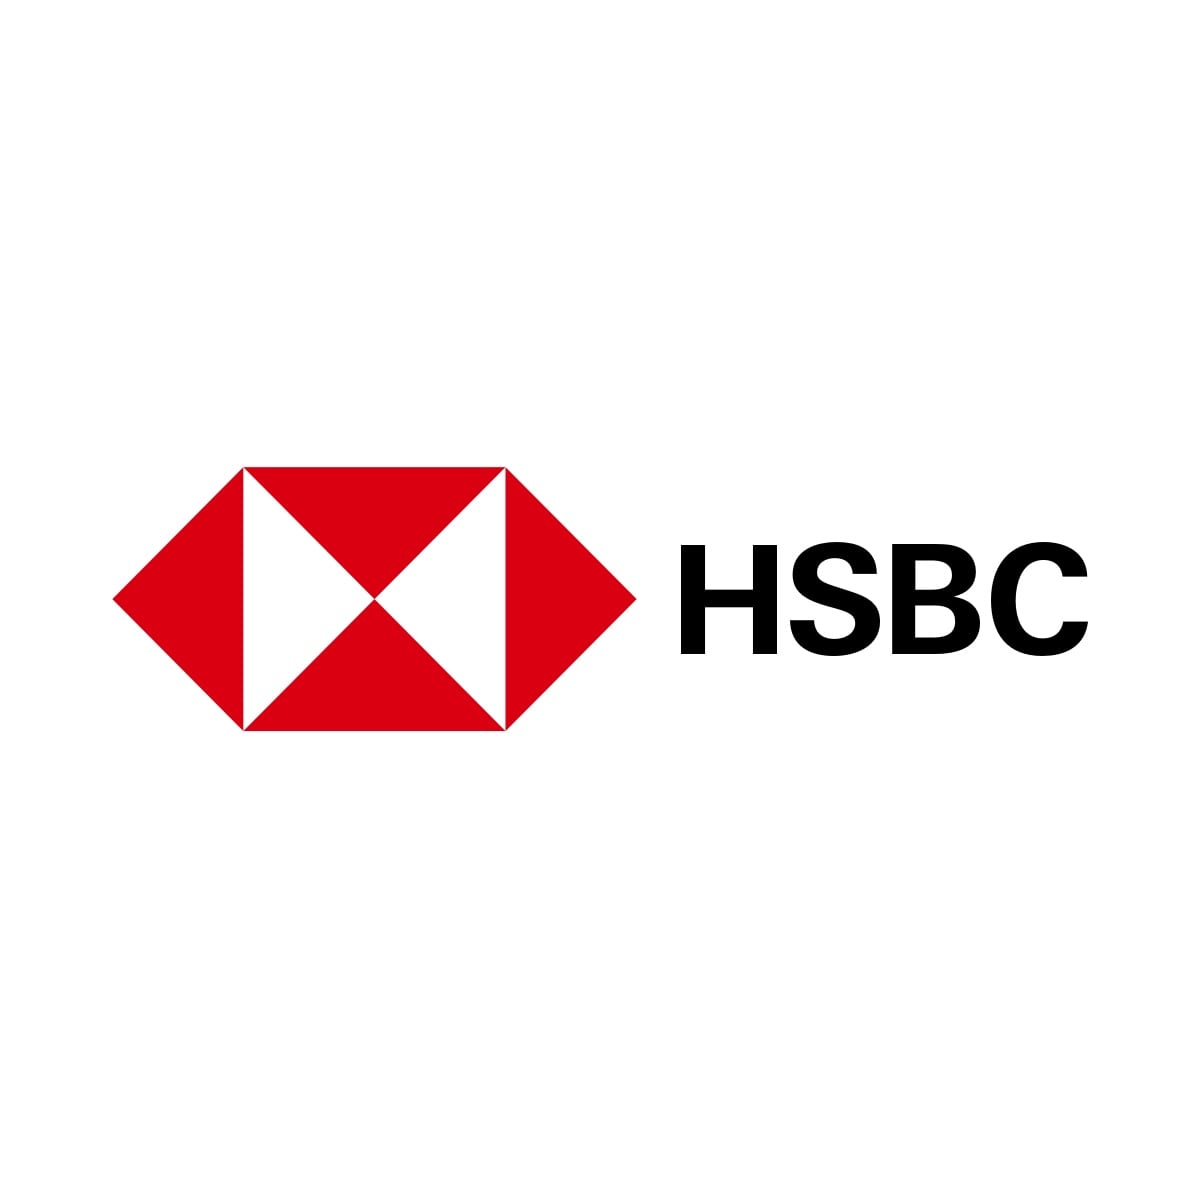 HSBC keen for 90 per cent LTV return but concerns remain for 95 per cent